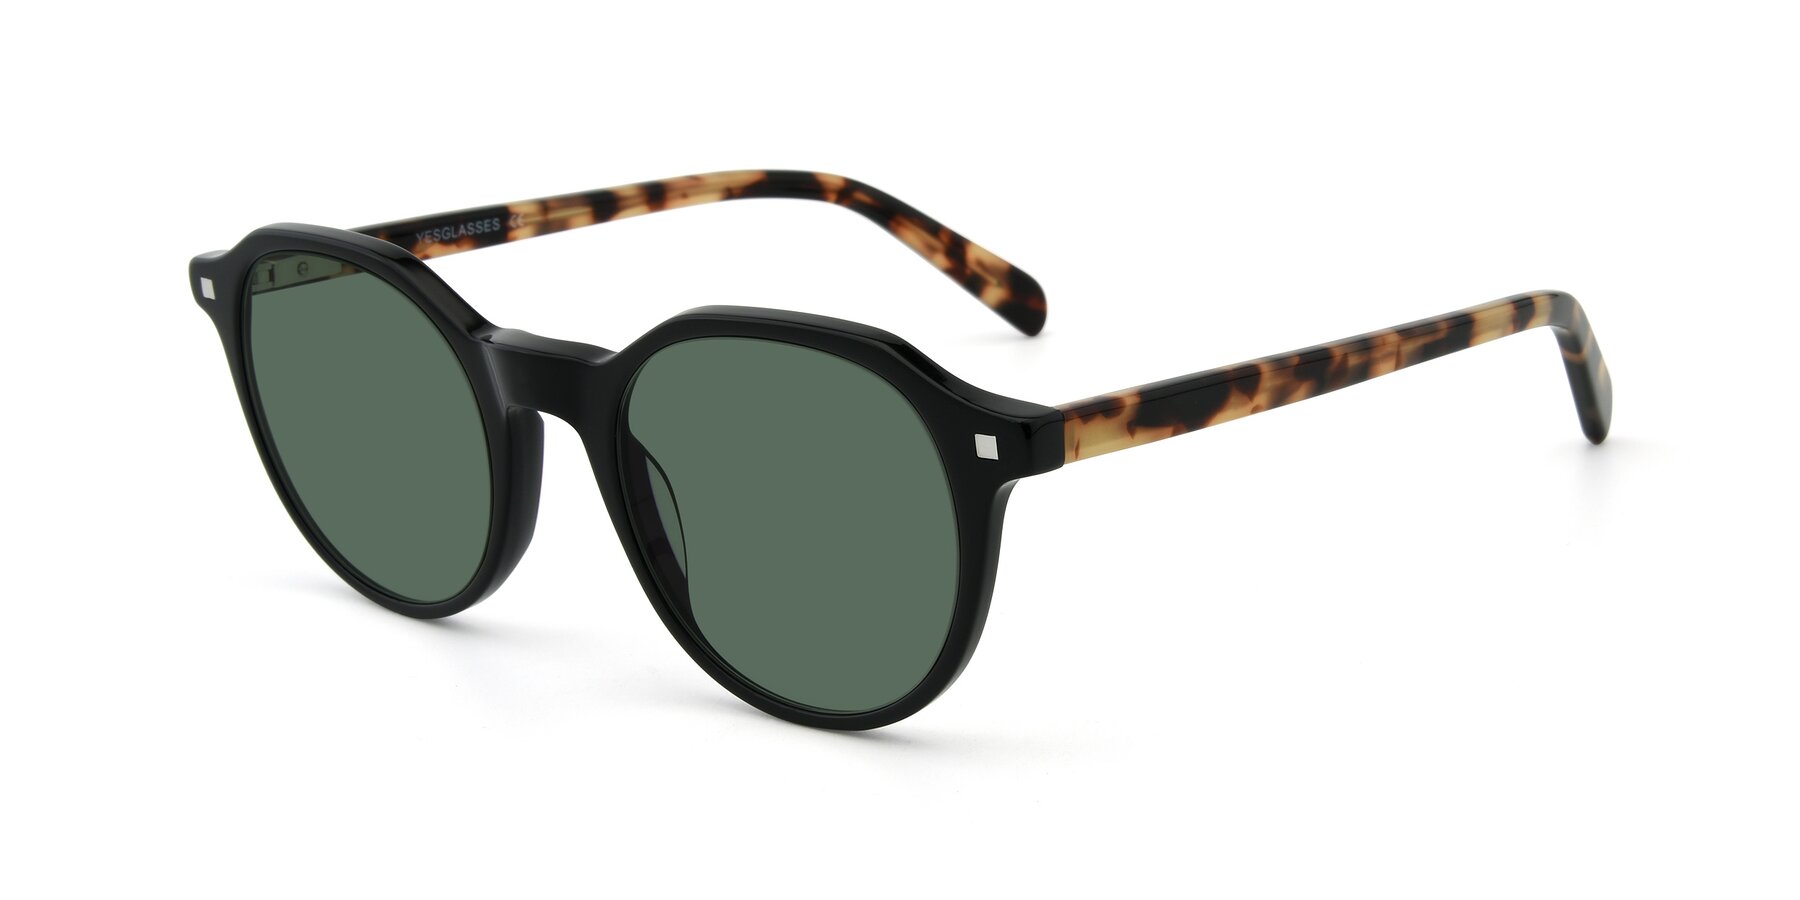 Angle of 17425 in Black with Green Polarized Lenses